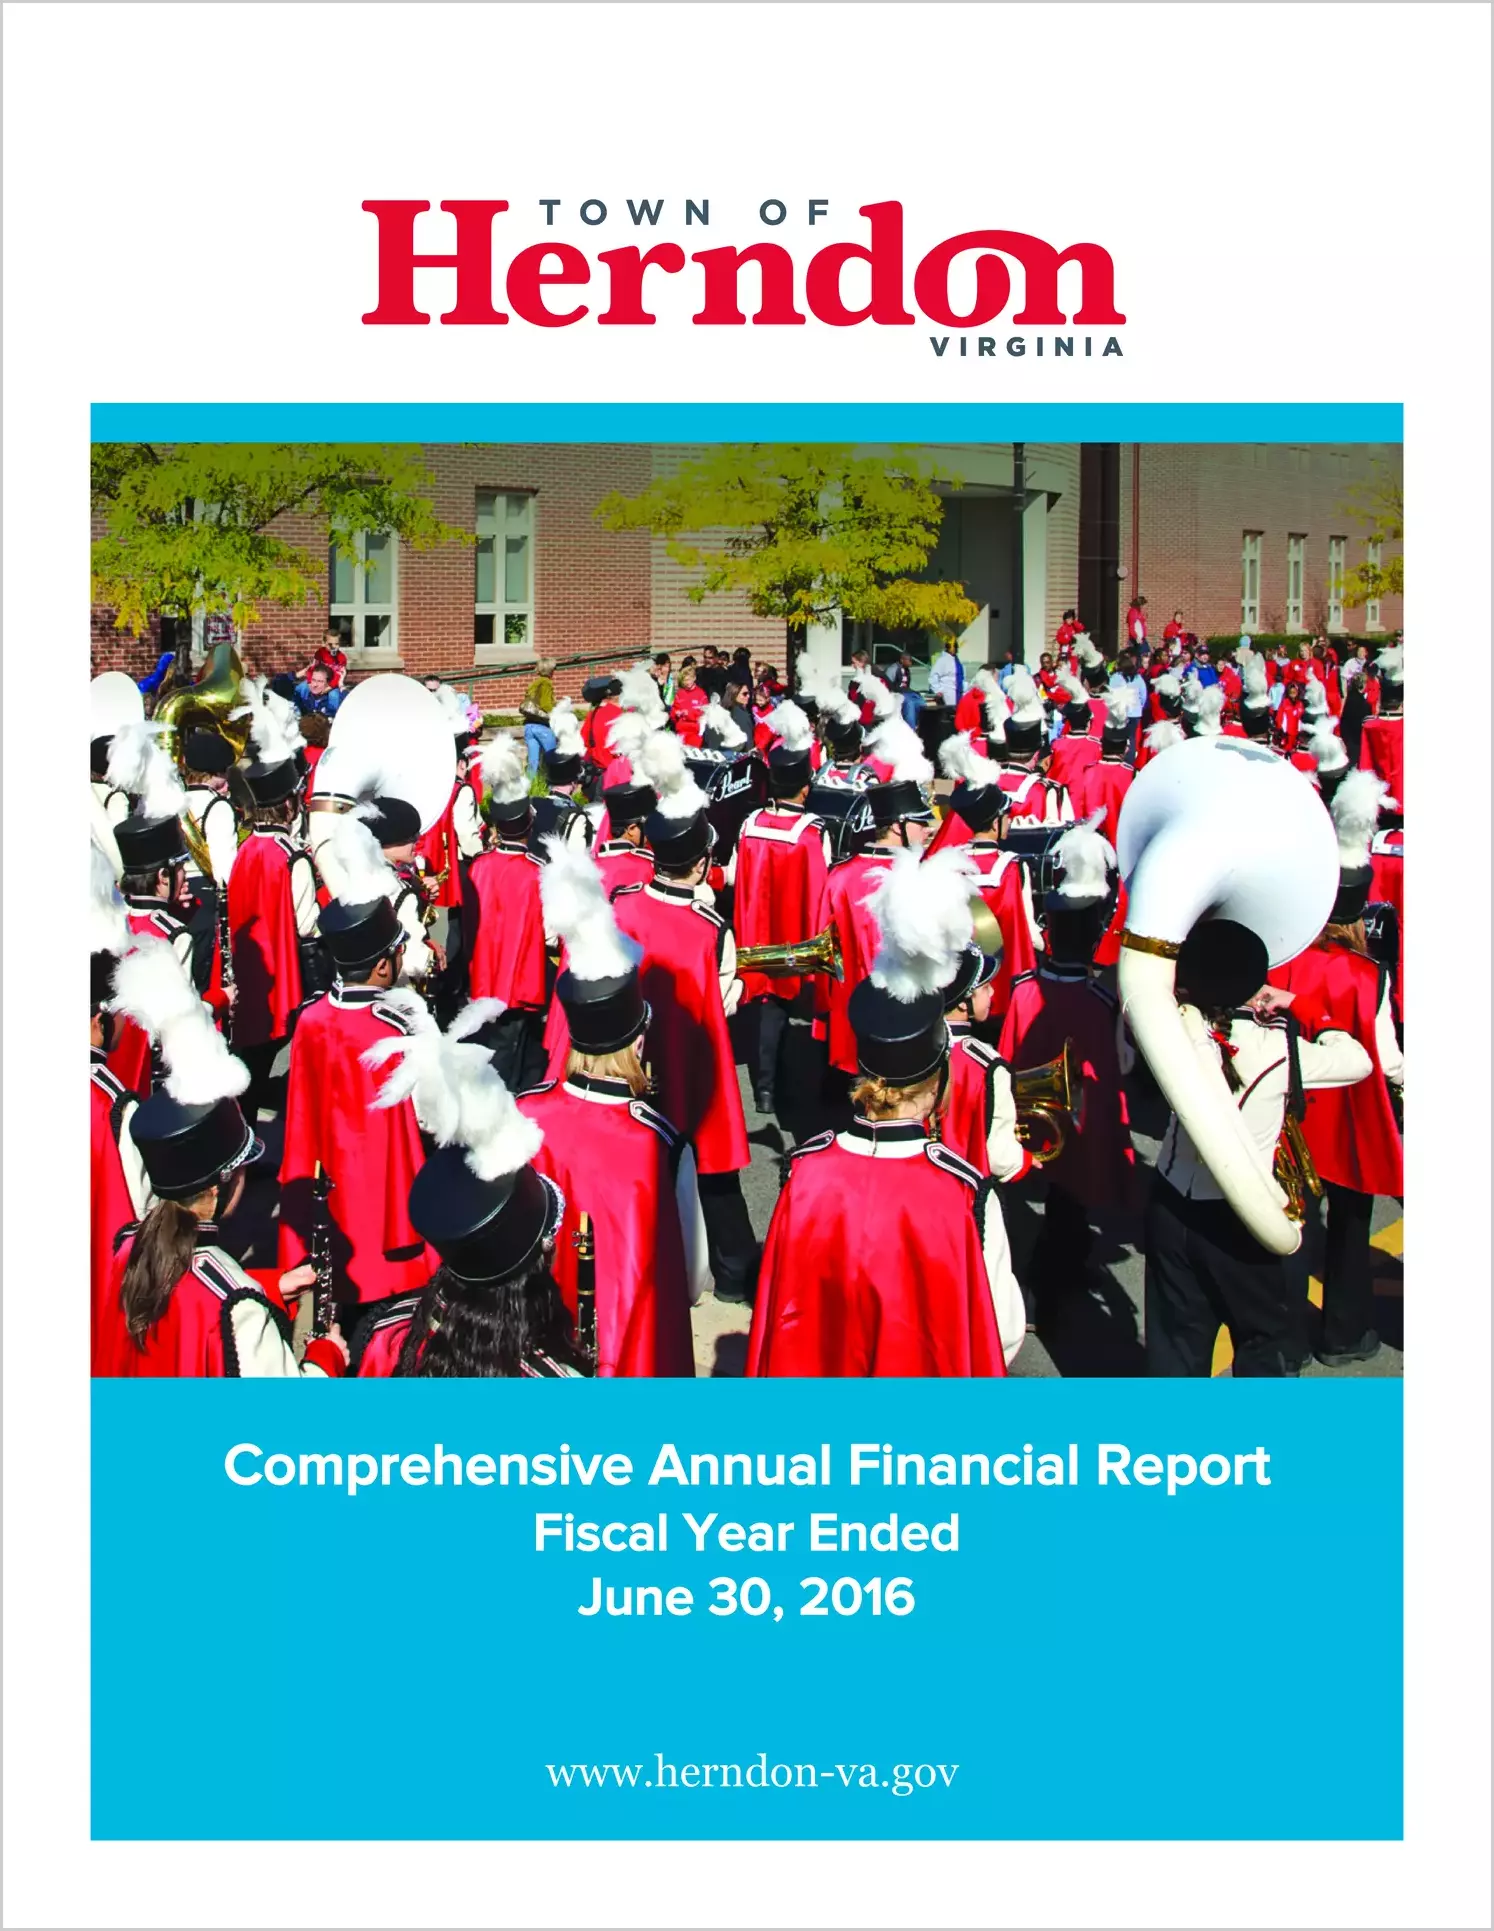 2016 Annual Financial Report for Town of Herndon